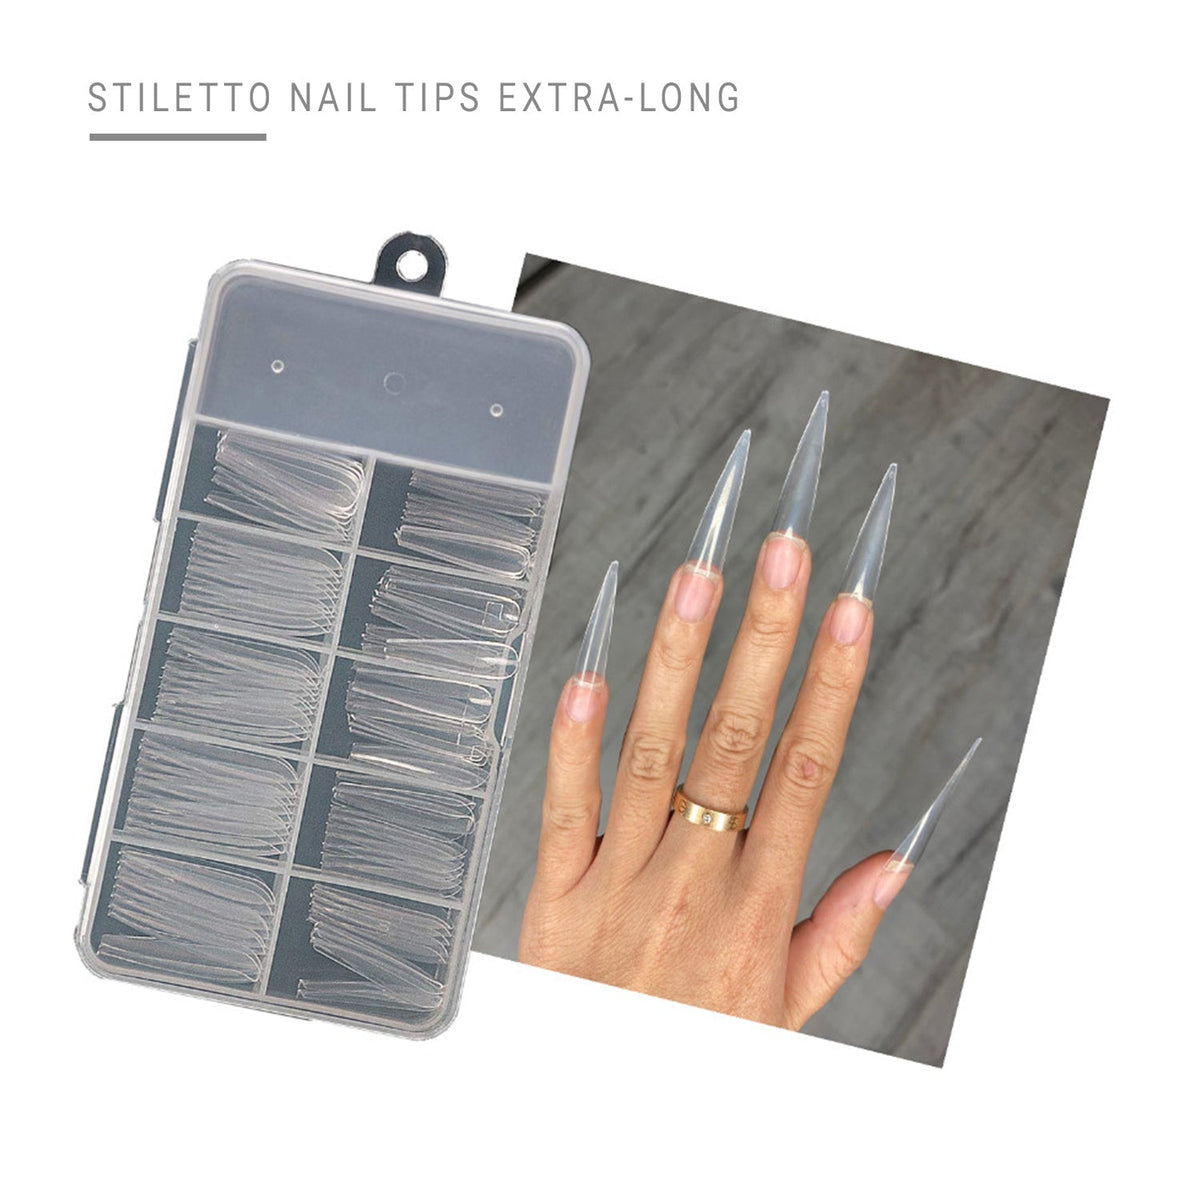 Clear Stiletto & Coffin Nail Tips - Extra-long Size | Buy 1 Get 1 Free-Nail Tips-OTHER- Nail Supply American Gel Polish - Phuong Ni